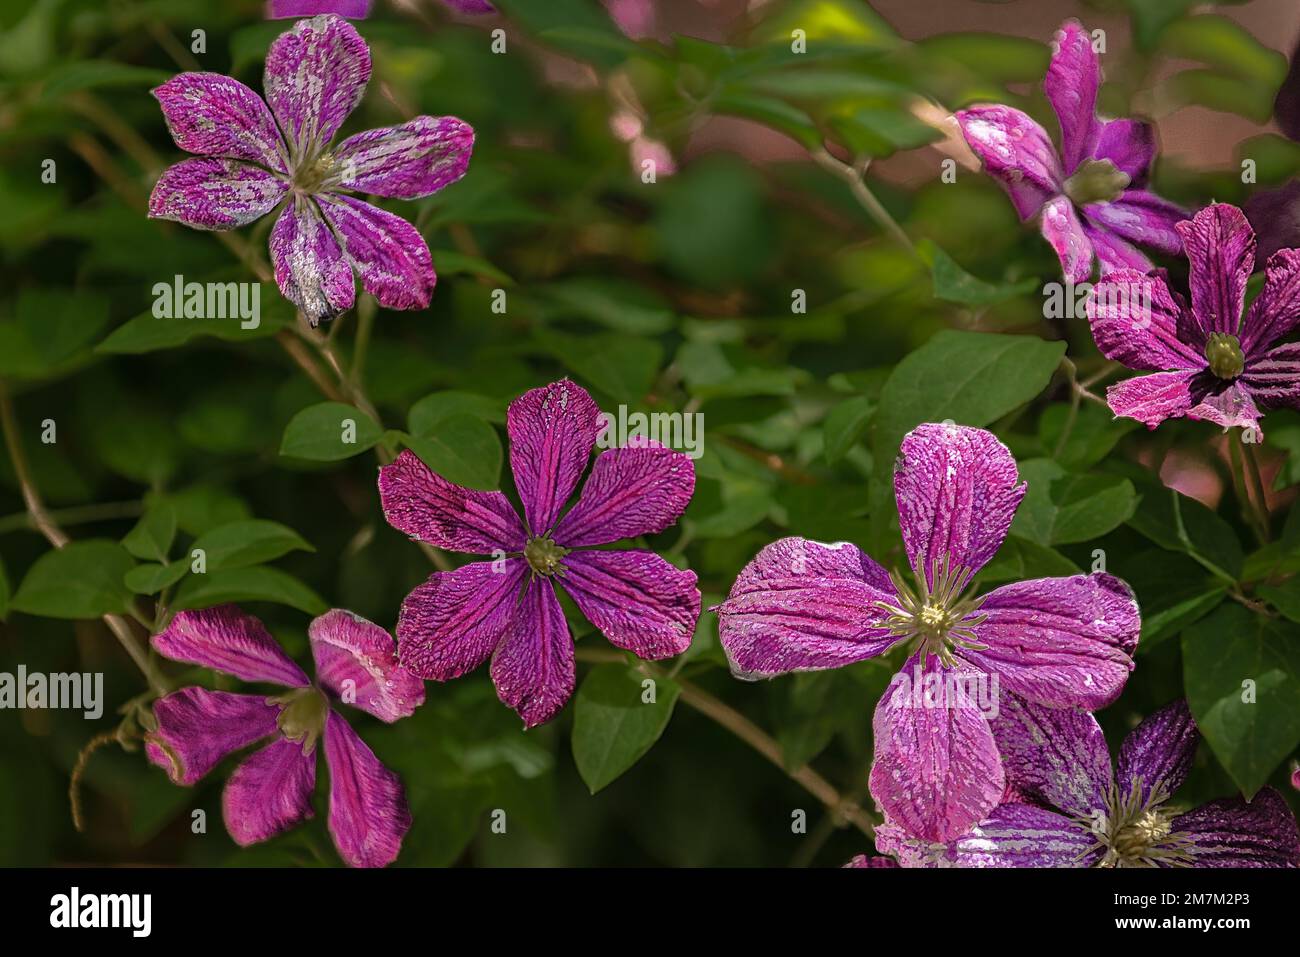 A selective focus of purple Clematis viticella flowers in a garden Stock Photo